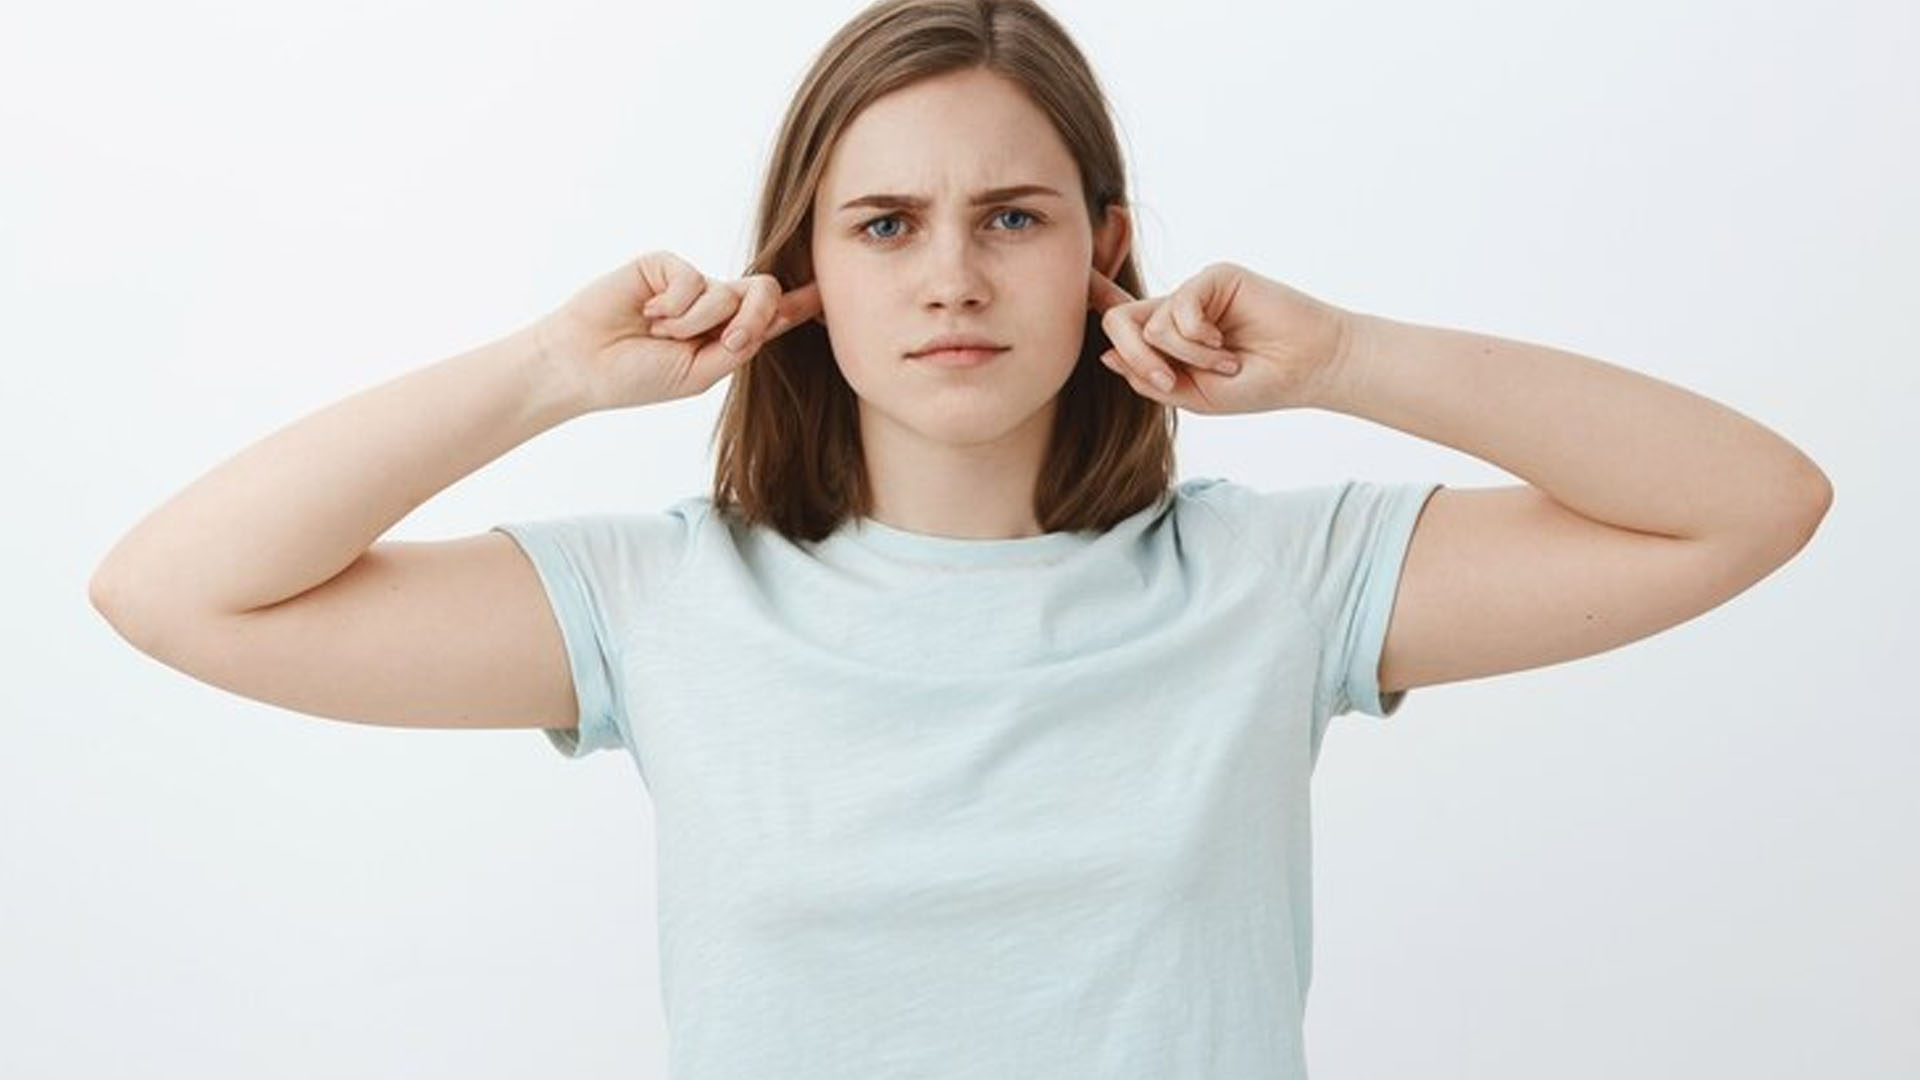 What are the Home Remedies for Blocked Ears?